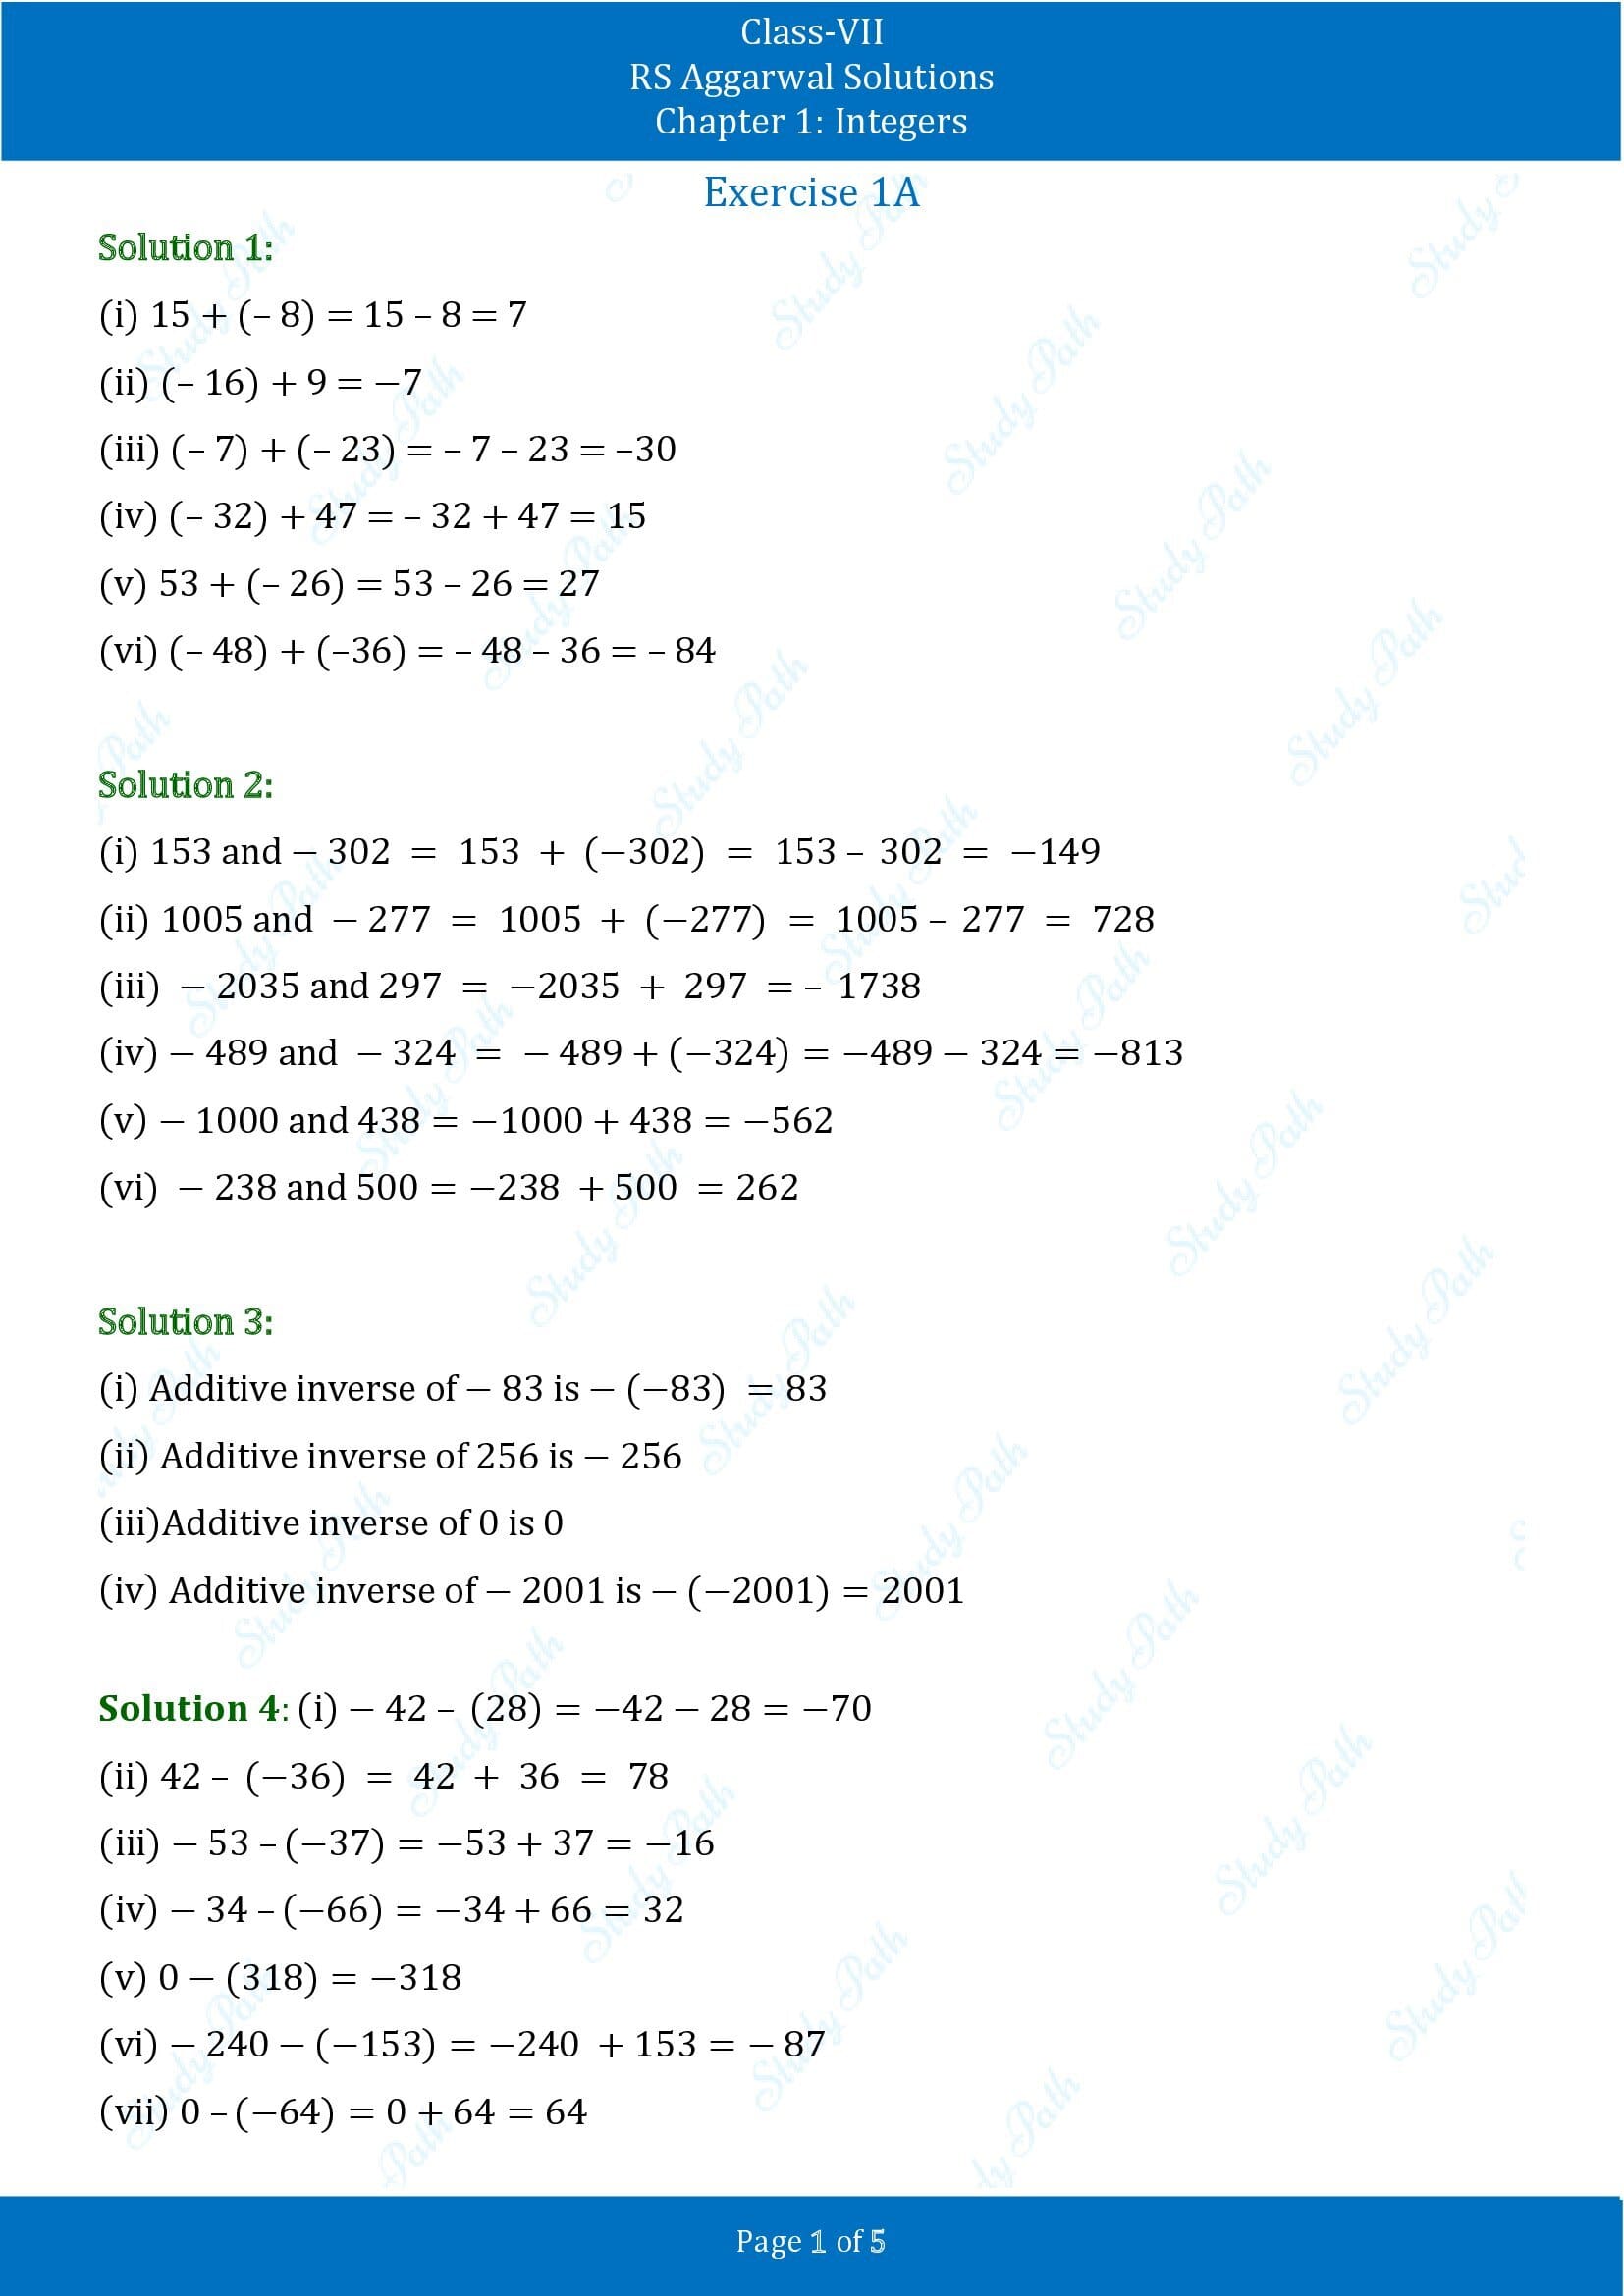 RS Aggarwal Solutions Class 7 Chapter 1 Integers Exercise 1A 0001